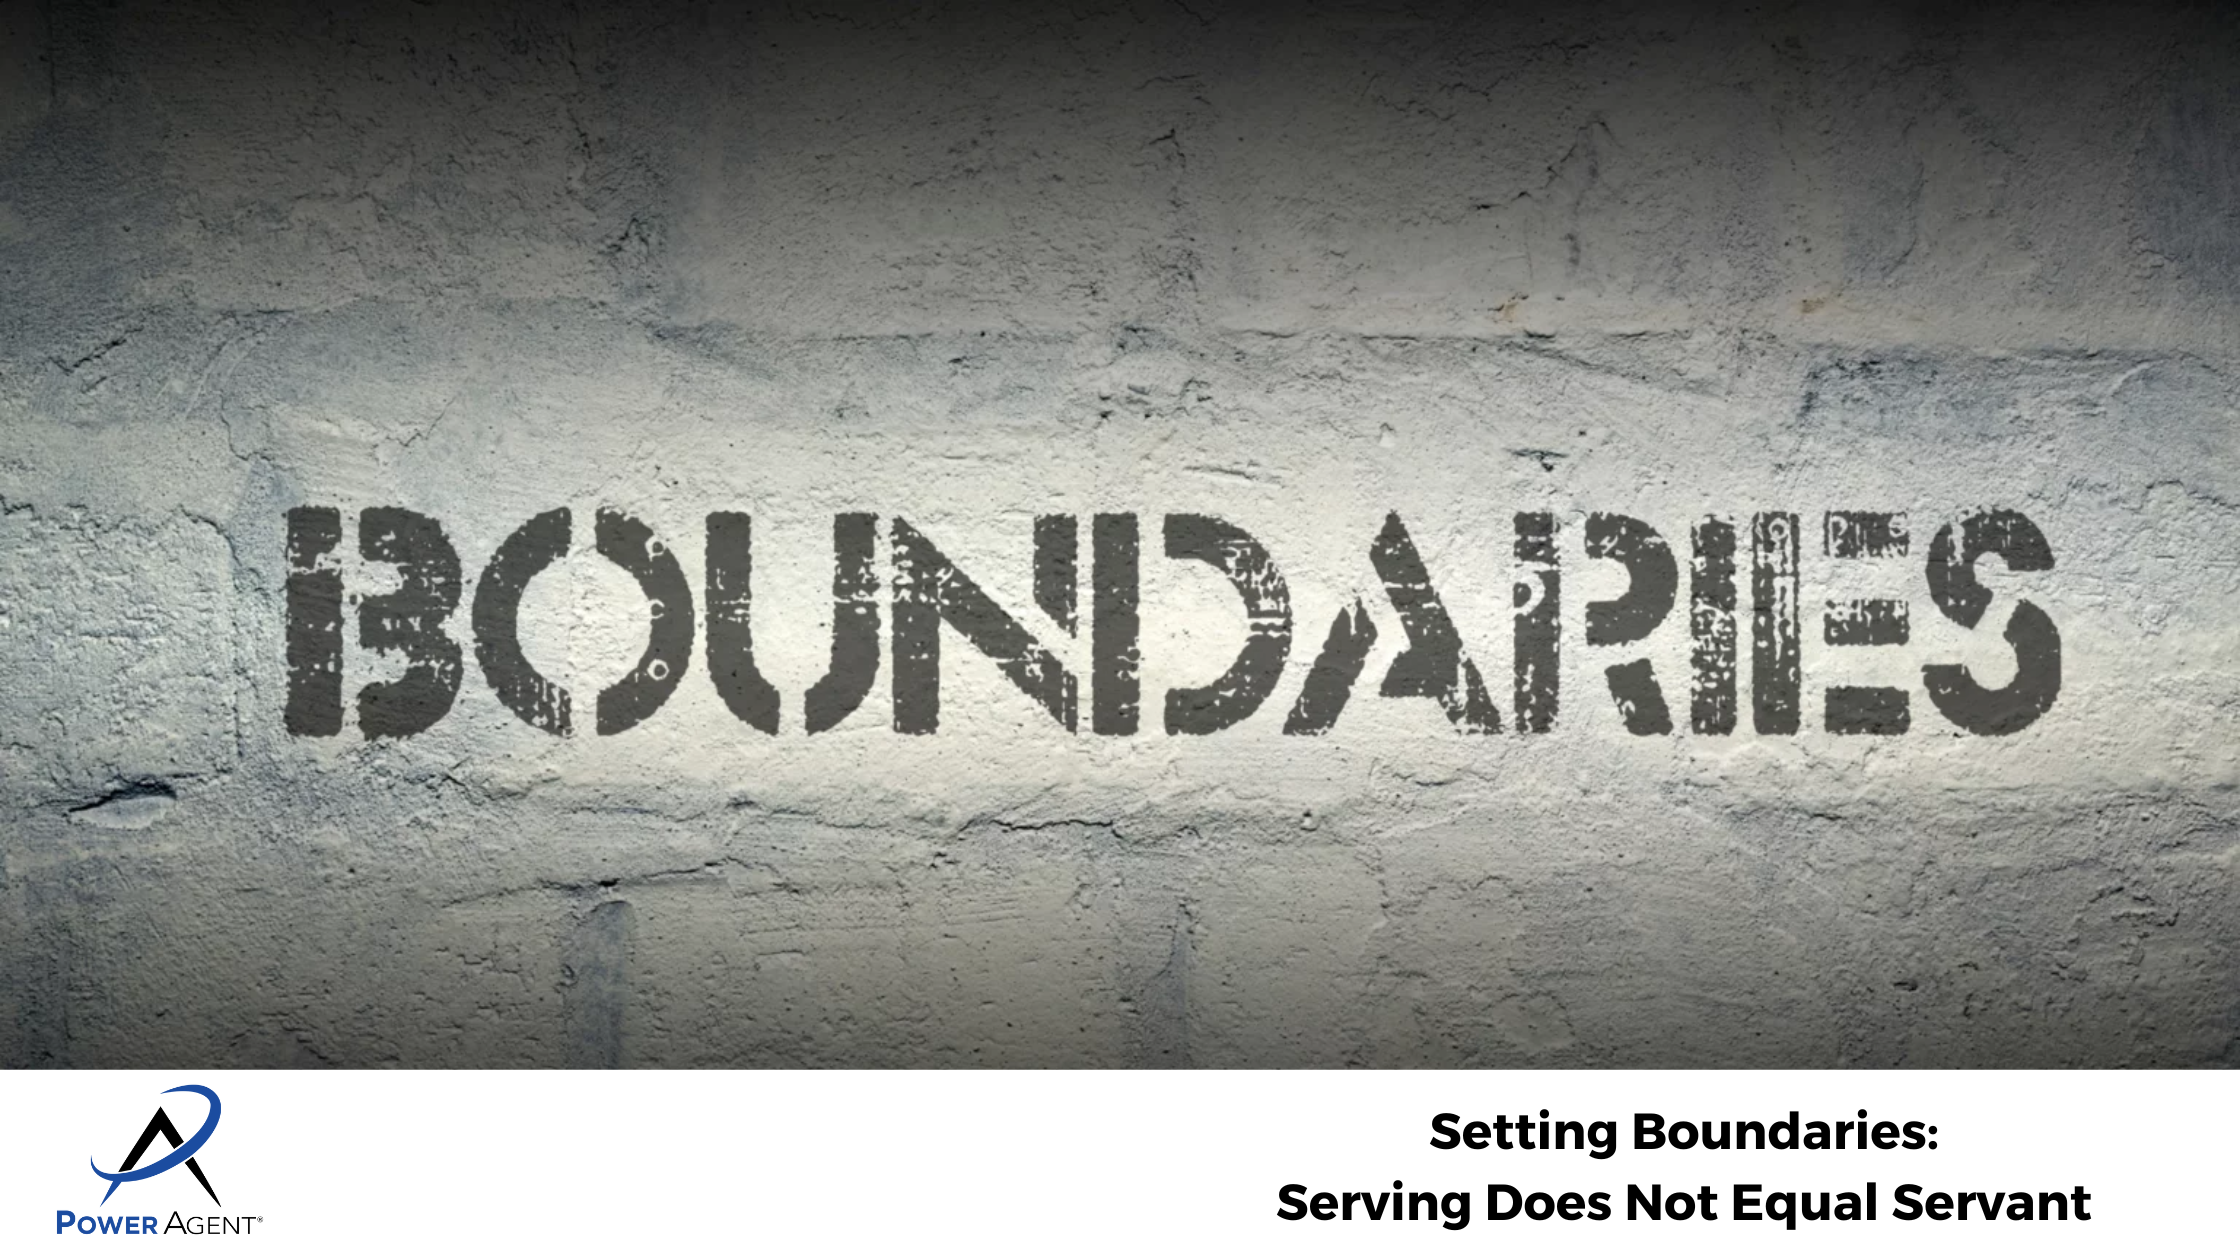 Setting Boundaries: Serving Does Not Equal Servant